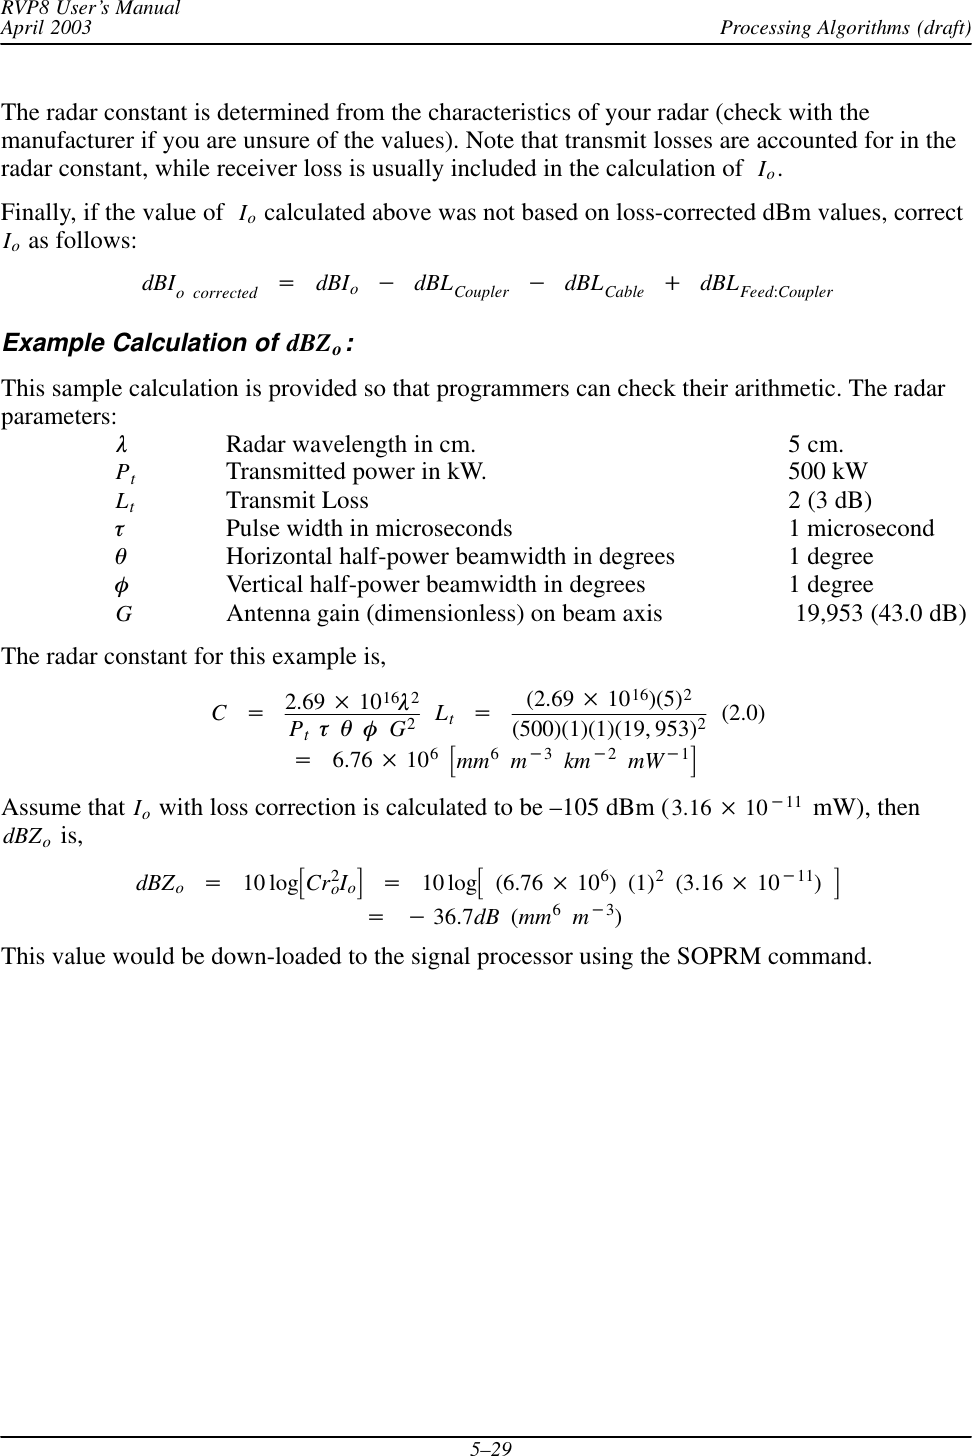 Processing Algorithms (draft)RVP8 User’s ManualApril 20035–29The radar constant is determined from the characteristics of your radar (check with themanufacturer if you are unsure of the values). Note that transmit losses are accounted for in theradar constant, while receiver loss is usually included in the calculation of Io.Finally, if the value of  Io calculated above was not based on loss-corrected dBm values, correctIo as follows:dBIo corrected +dBIo*dBLCoupler *dBLCable )dBLFeed:CouplerExample Calculation of dBZo:This sample calculation is provided so that programmers can check their arithmetic. The radarparameters:lRadar wavelength in cm. 5 cm.PtTransmitted power in kW. 500 kWLtTransmit Loss 2 (3 dB)tPulse width in microseconds 1 microsecondqHorizontal half-power beamwidth in degrees 1 degreefVertical half-power beamwidth in degrees 1 degreeGAntenna gain (dimensionless) on beam axis  19,953 (43.0 dB)The radar constant for this example is,C+2.69  1016l2PttqfG2Lt+(2.69  1016)(5)2(500)(1)(1)(19, 953)2(2.0)+6.76  106ƪmm6m*3km*2mW*1ƫAssume that Io with loss correction is calculated to be –105 dBm (3.16  10*11  mW), thendBZo is,dBZo+10 logƪCr2oIoƫ+10 logƪ(6.76  106)(1)2(3.16  10*11)ƫ+*36.7dB (mm6m*3)This value would be down-loaded to the signal processor using the SOPRM command.